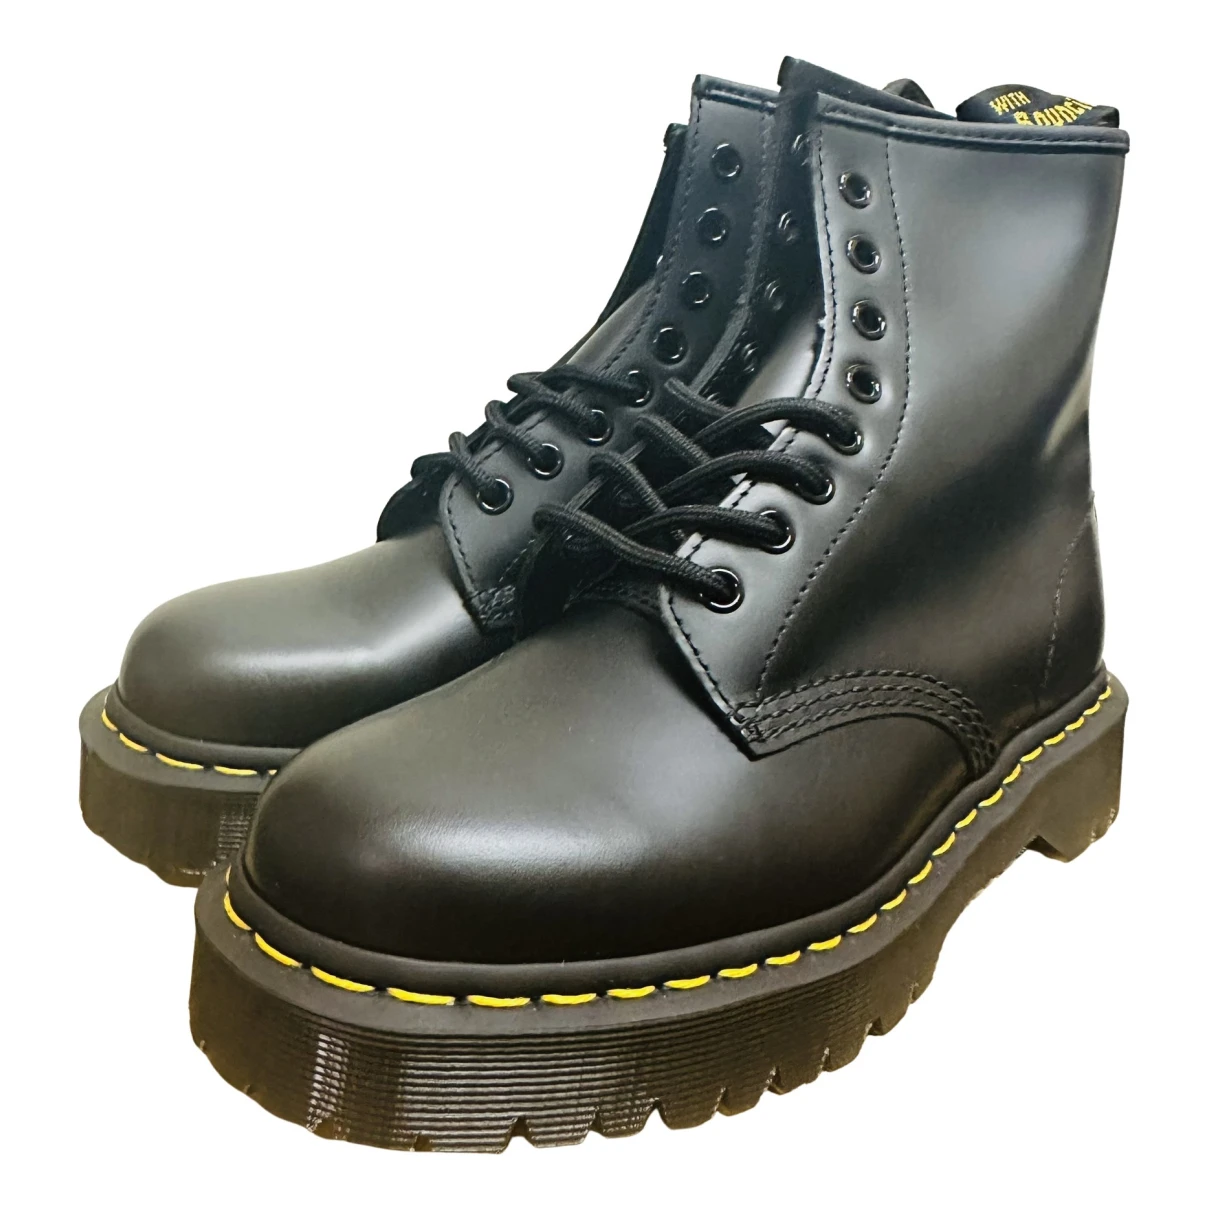 shoes Dr. Martens boots 1460 Pascal (8 eye) for Female Leather 8 US. Used condition